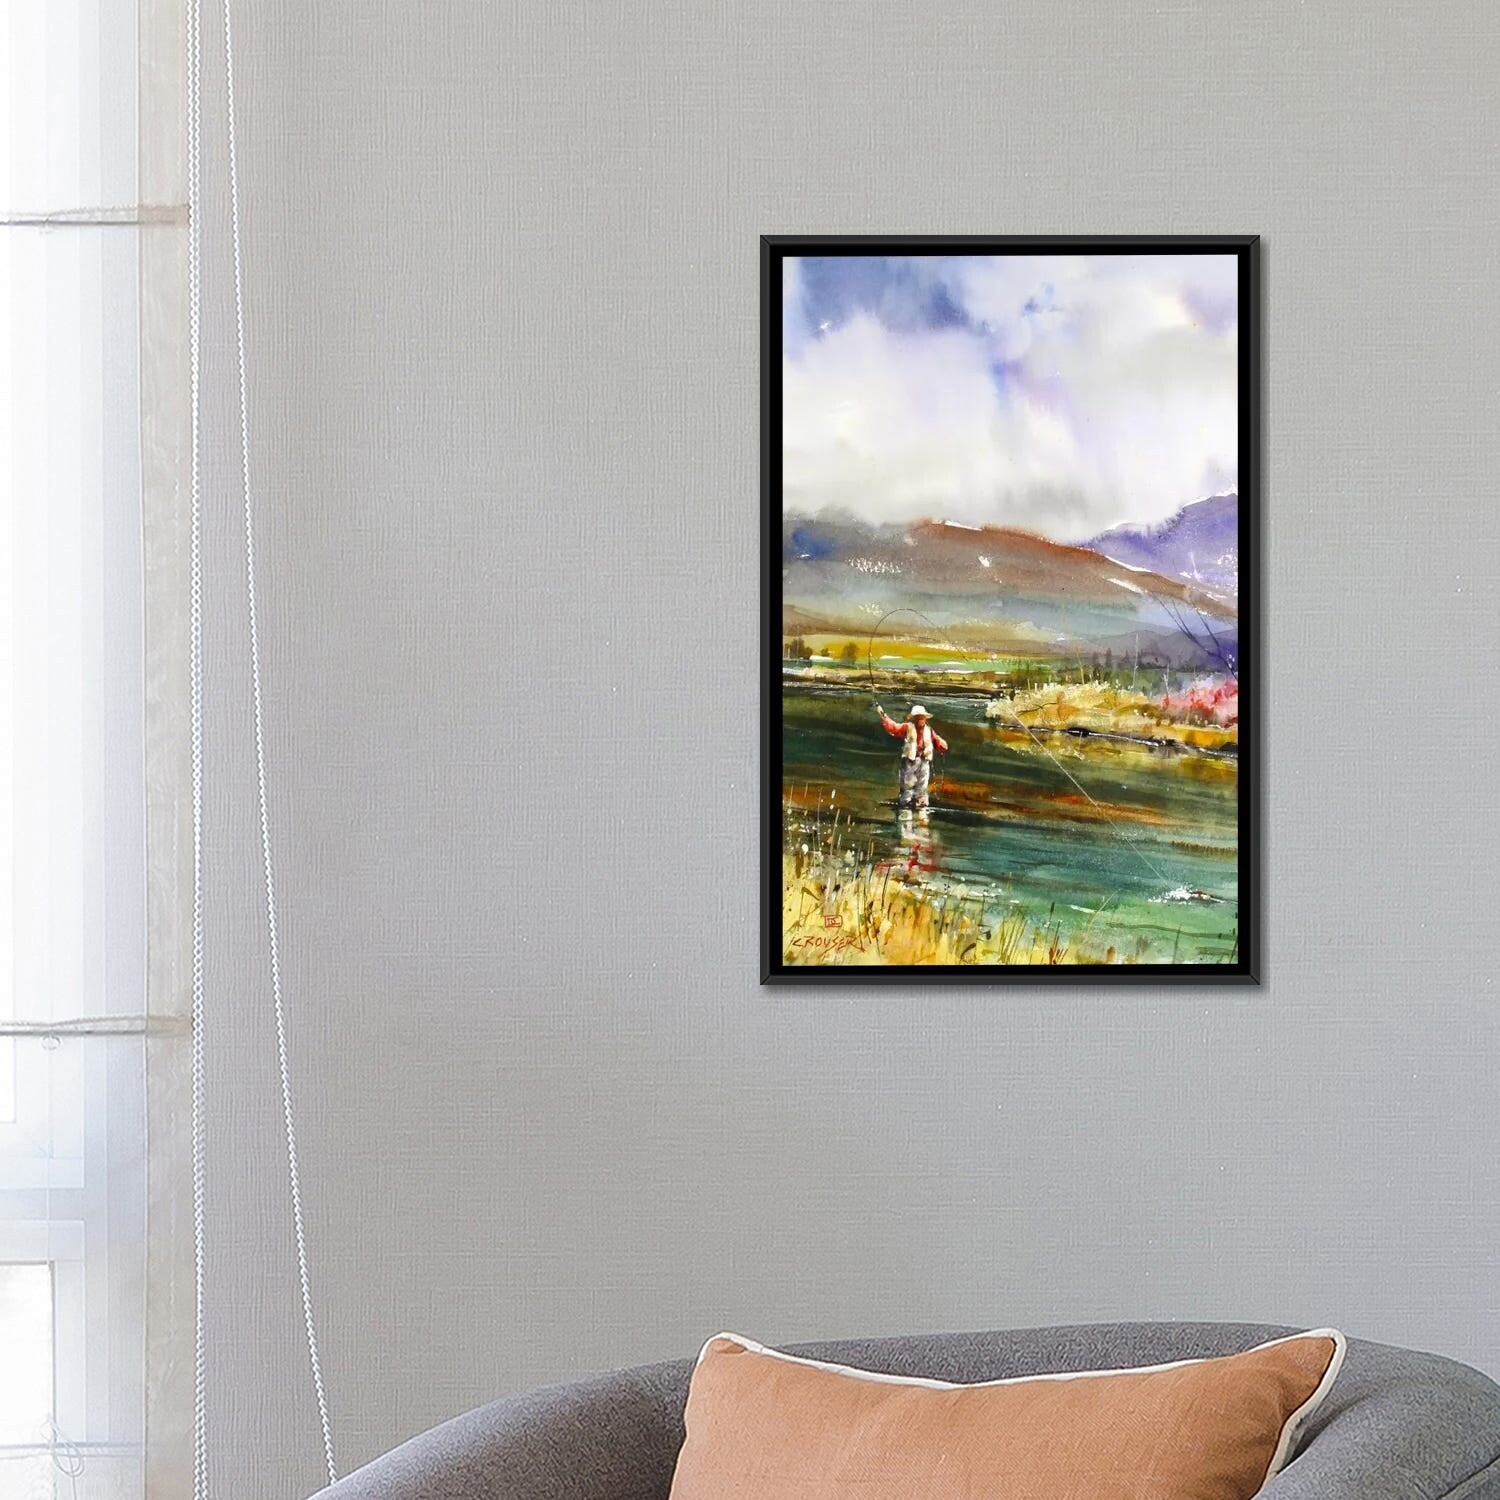 iCanvas Fishing II by Dean Crouser Framed Canvas Print